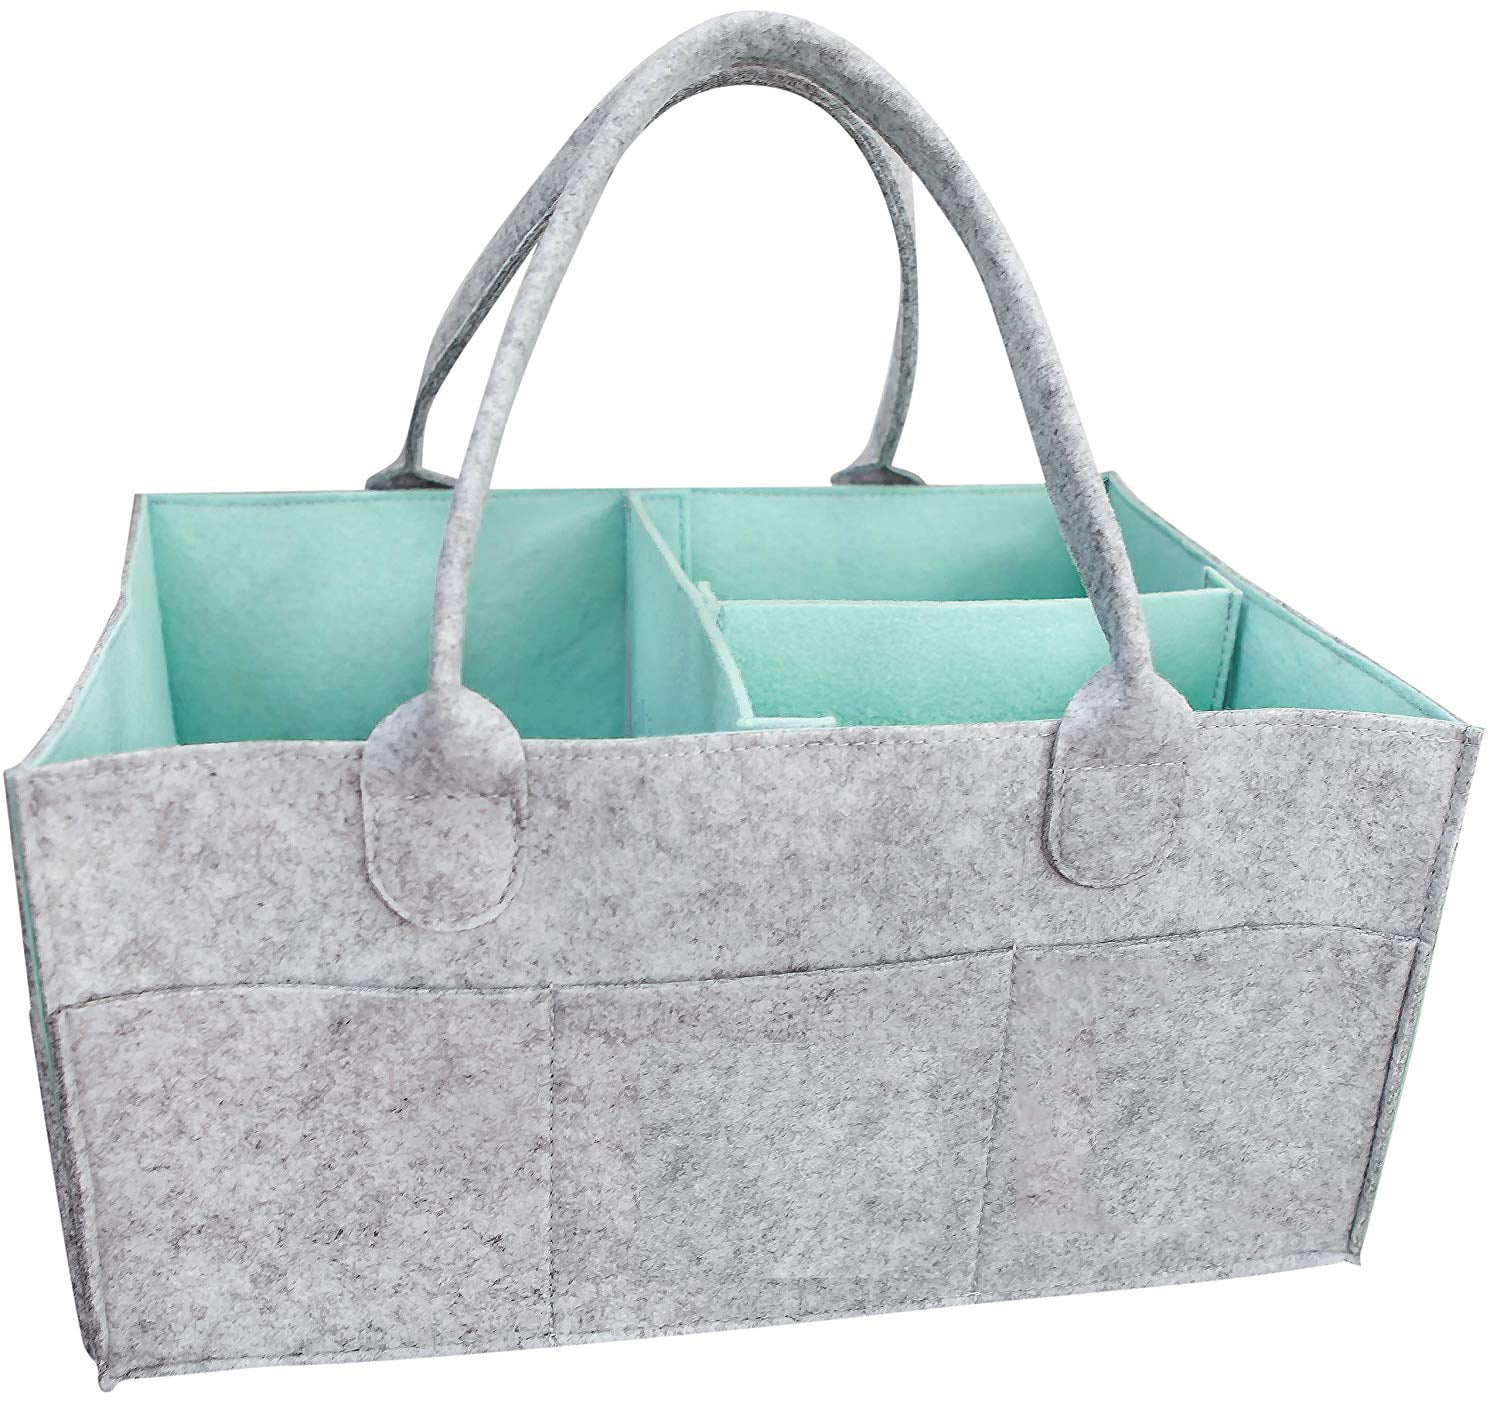 Grey Baby Diaper Caddy Organizer Tote Baby Shower Gifts for Newborn LDOIGBT Large Nursery Storage Bin with Changing Mat and Car Organizer for Baby Diapers and Wipes 